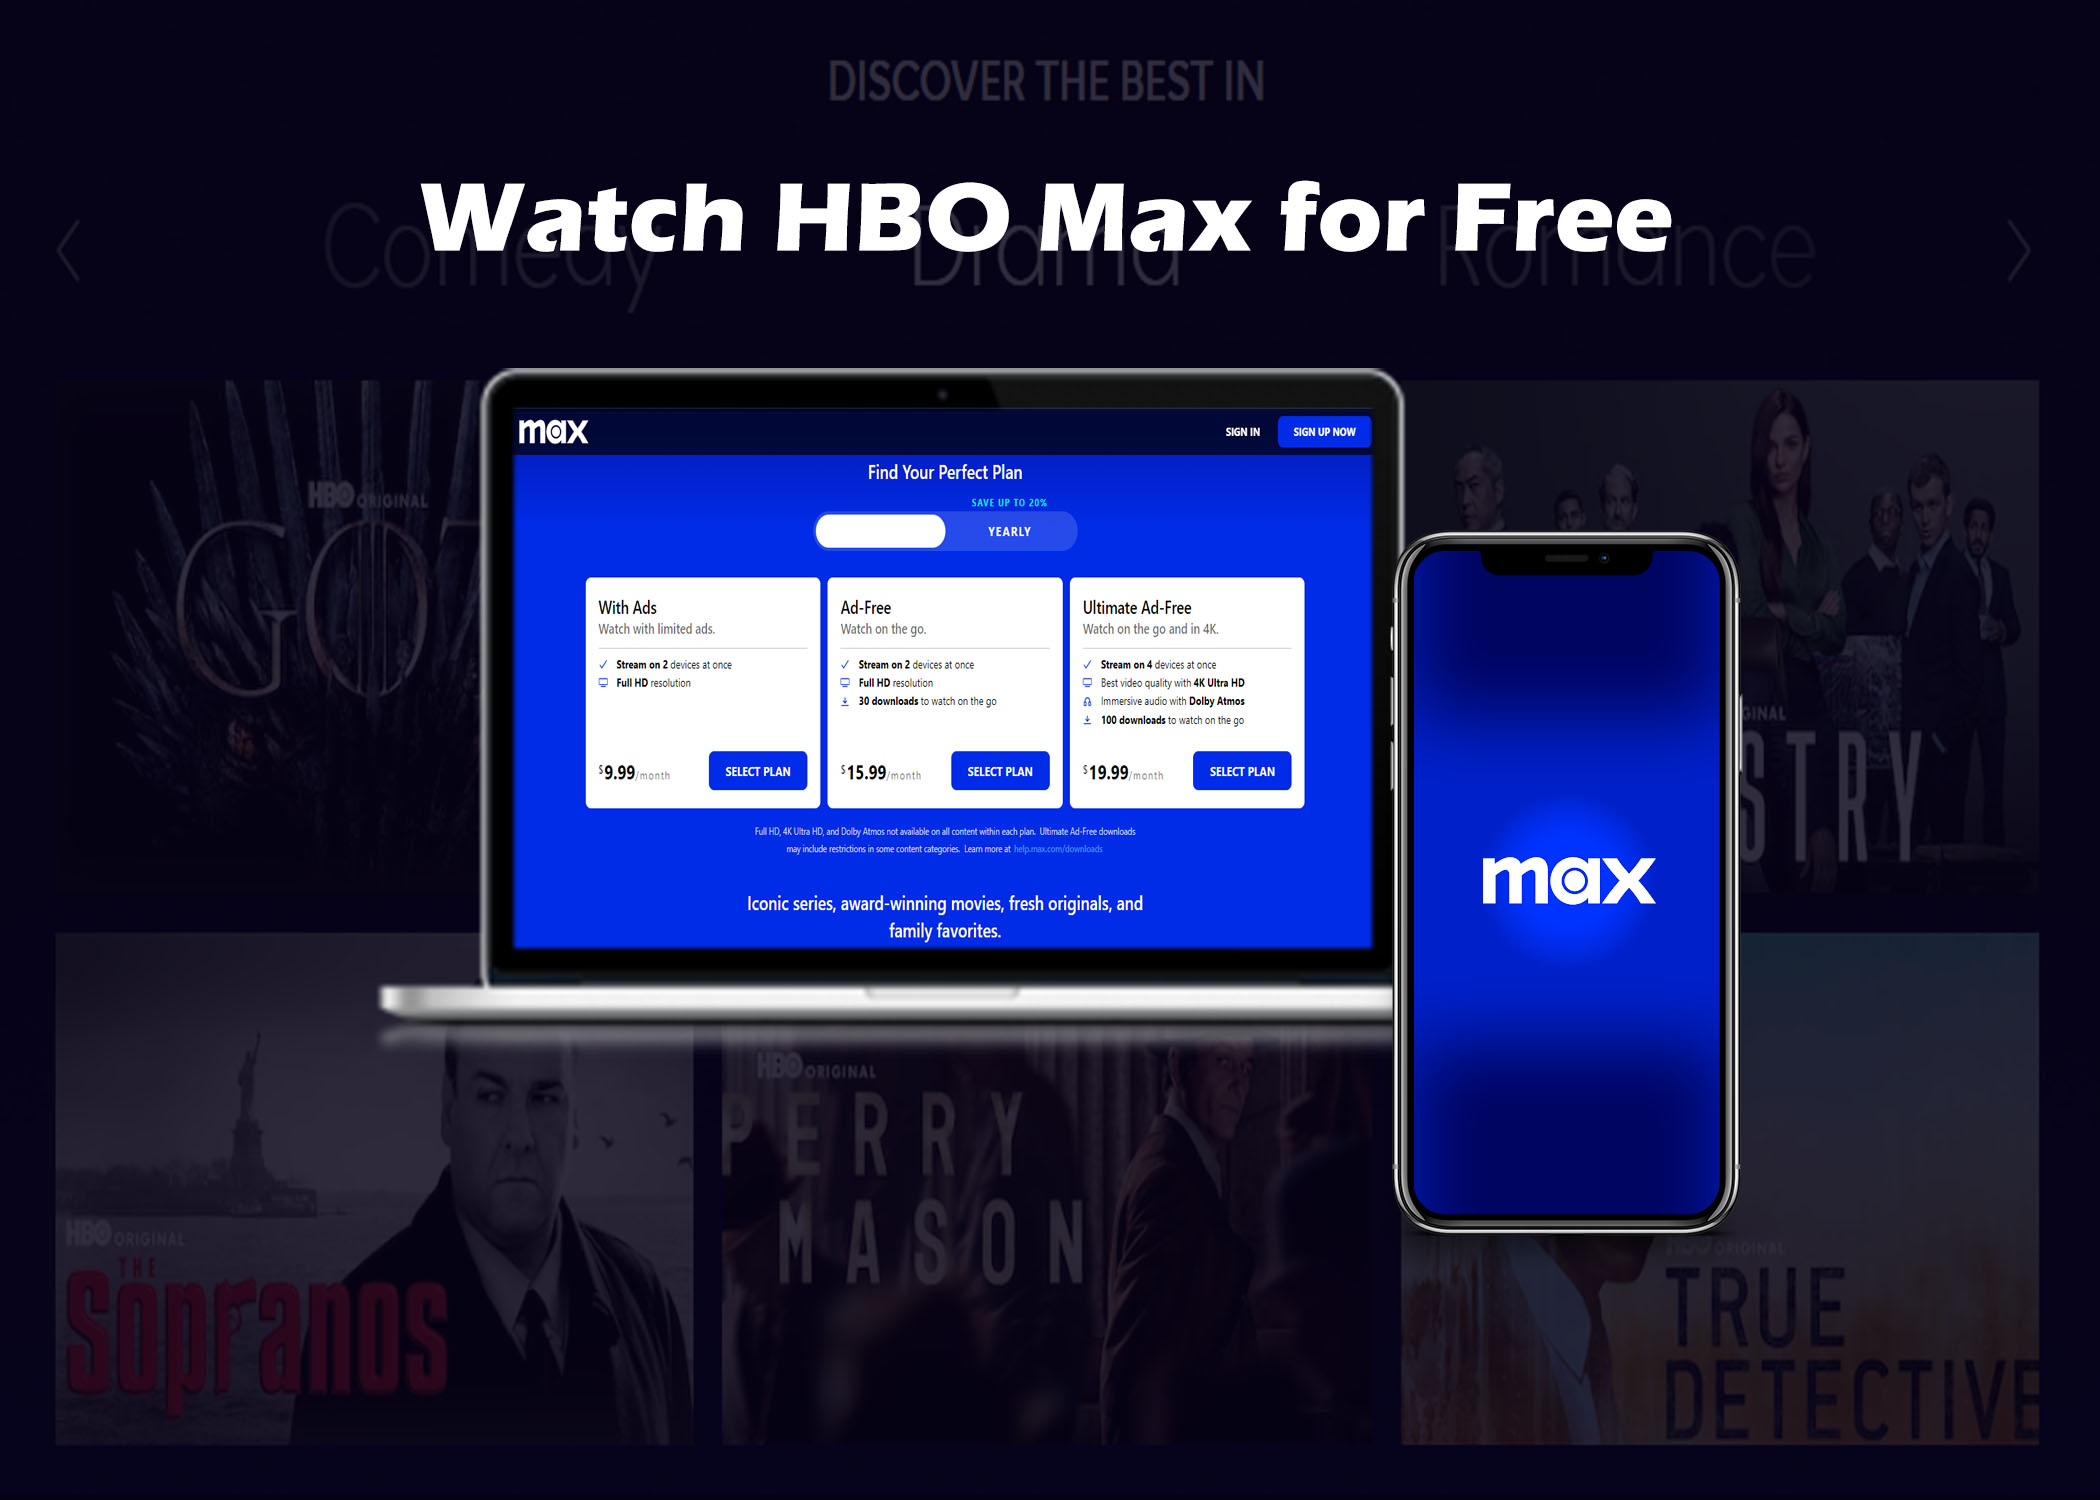 Watch HBO Max for Free - Partner Offers & Discount | Save Money